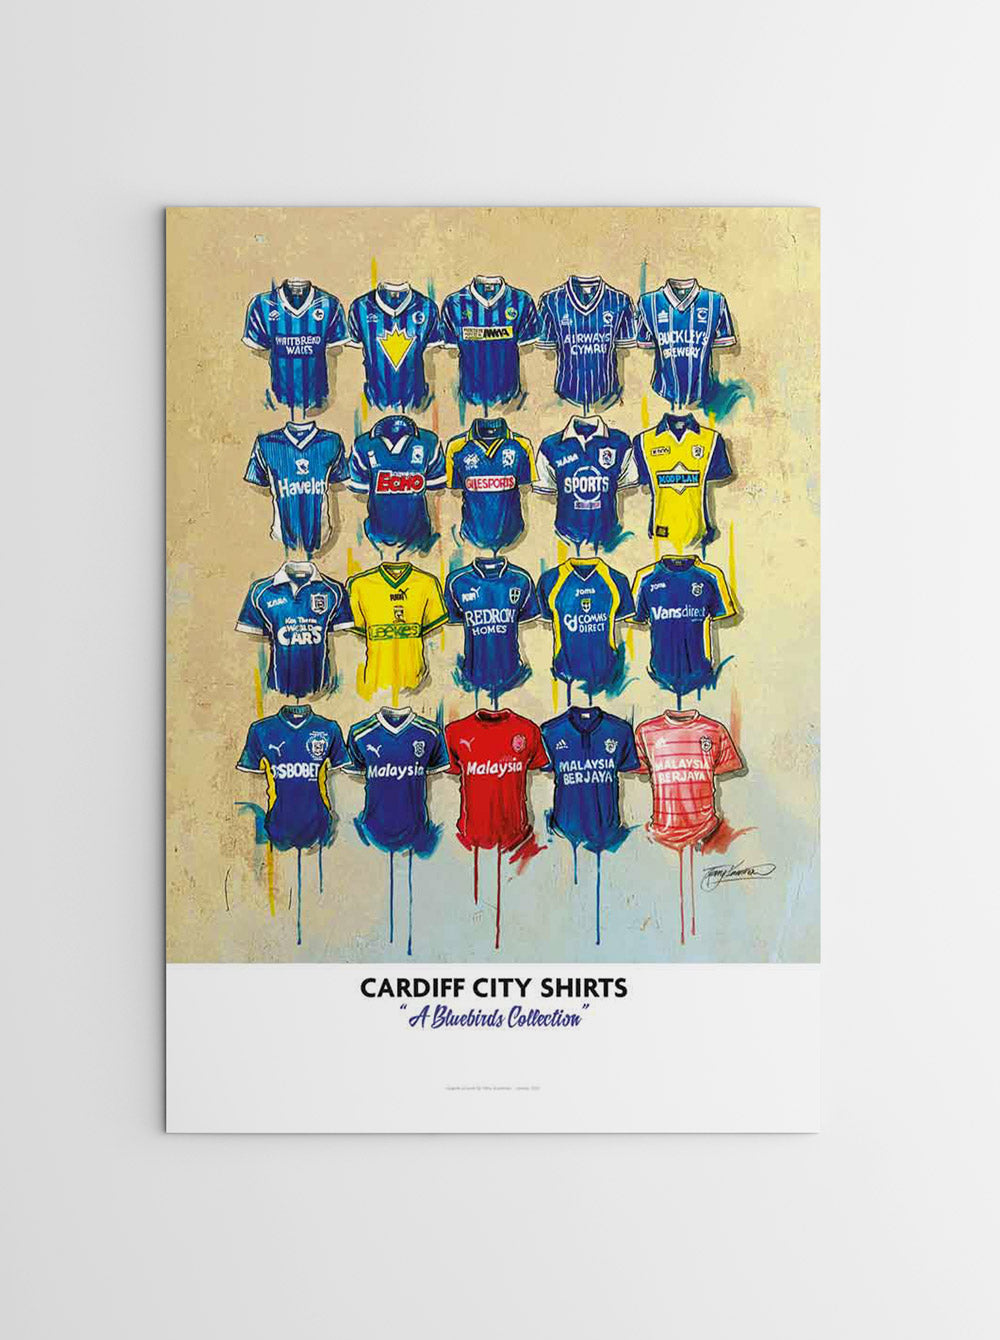 The Cardiff Personalised A2 limited edition print by Terry Kneeshaw features 20 iconic Cardiff jerseys. The artwork showcases the team's history, featuring personalized prints of some of their best and most memorable jerseys. From classic blue and white stripes to modern red and black designs, the print takes fans on a journey through the club's history. It is a must-have for any Cardiff fan looking to celebrate the team's legacy in style.